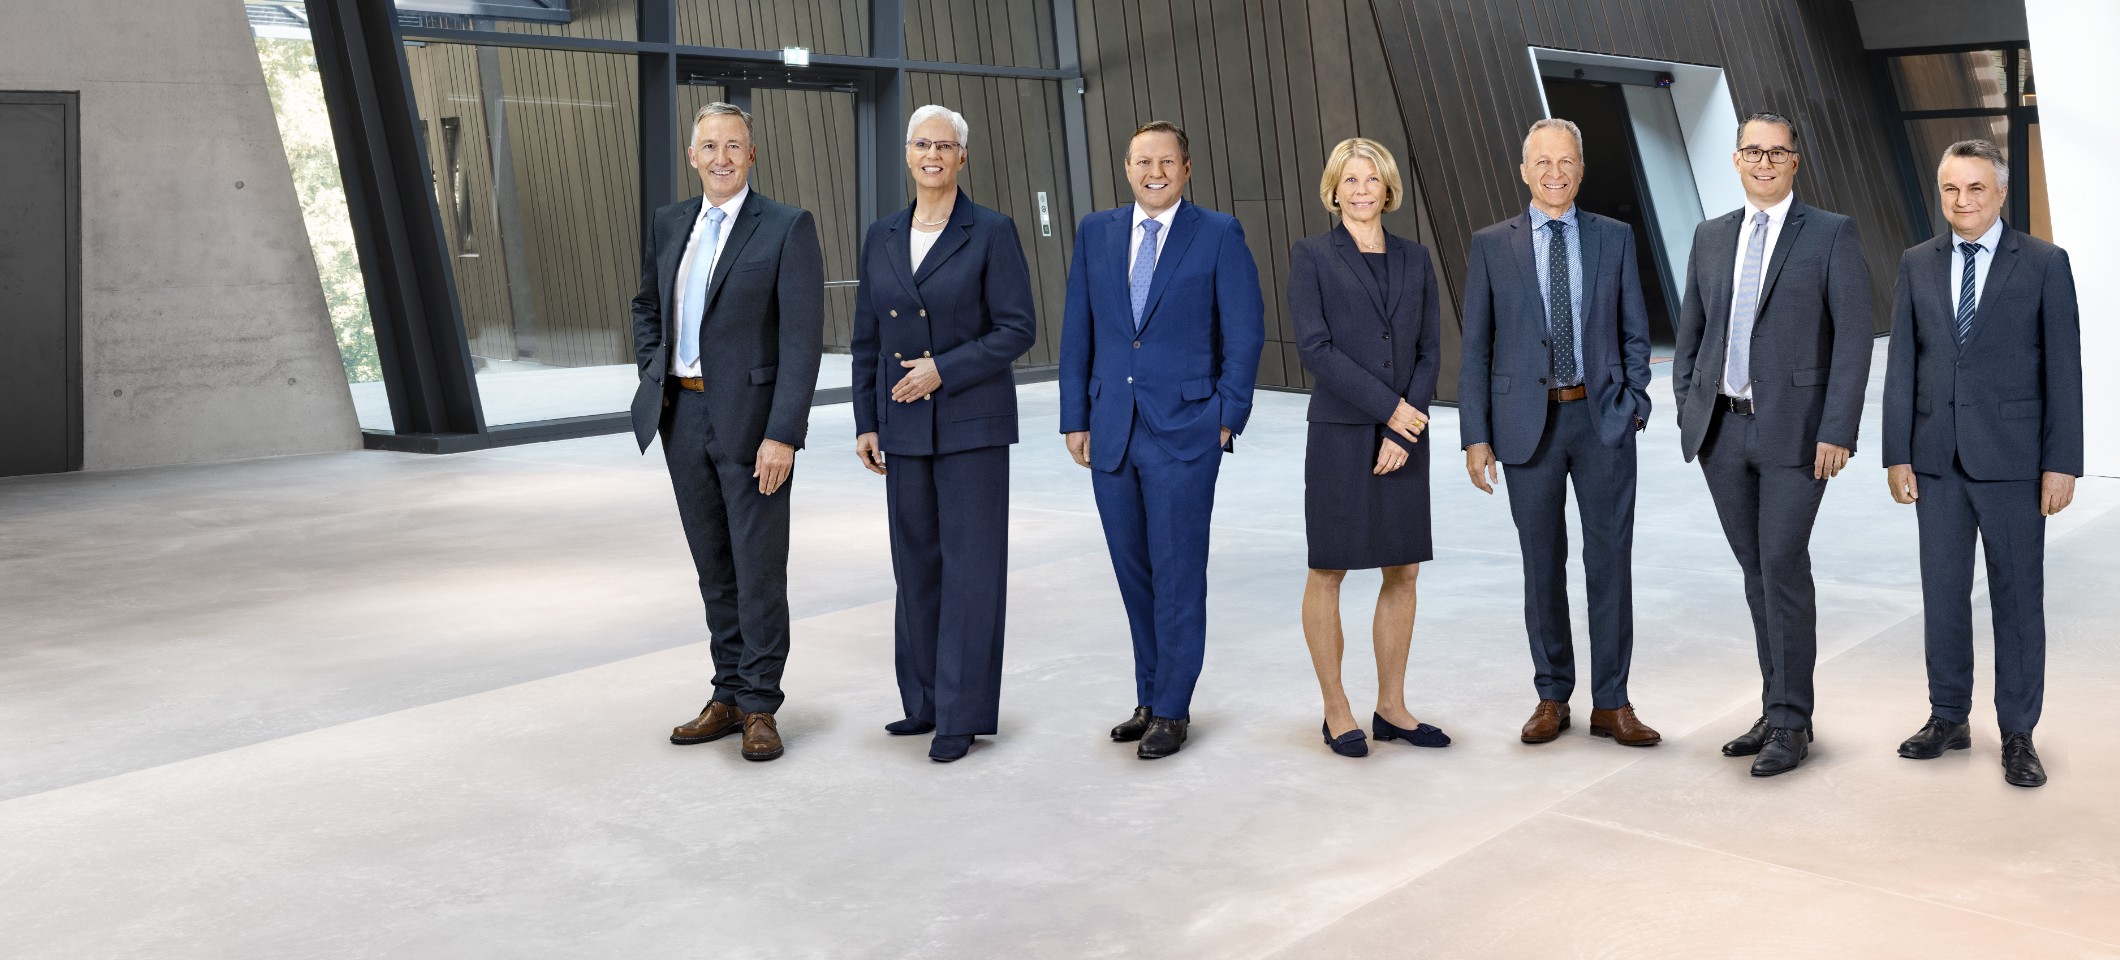 Portrait of the members of the executive board